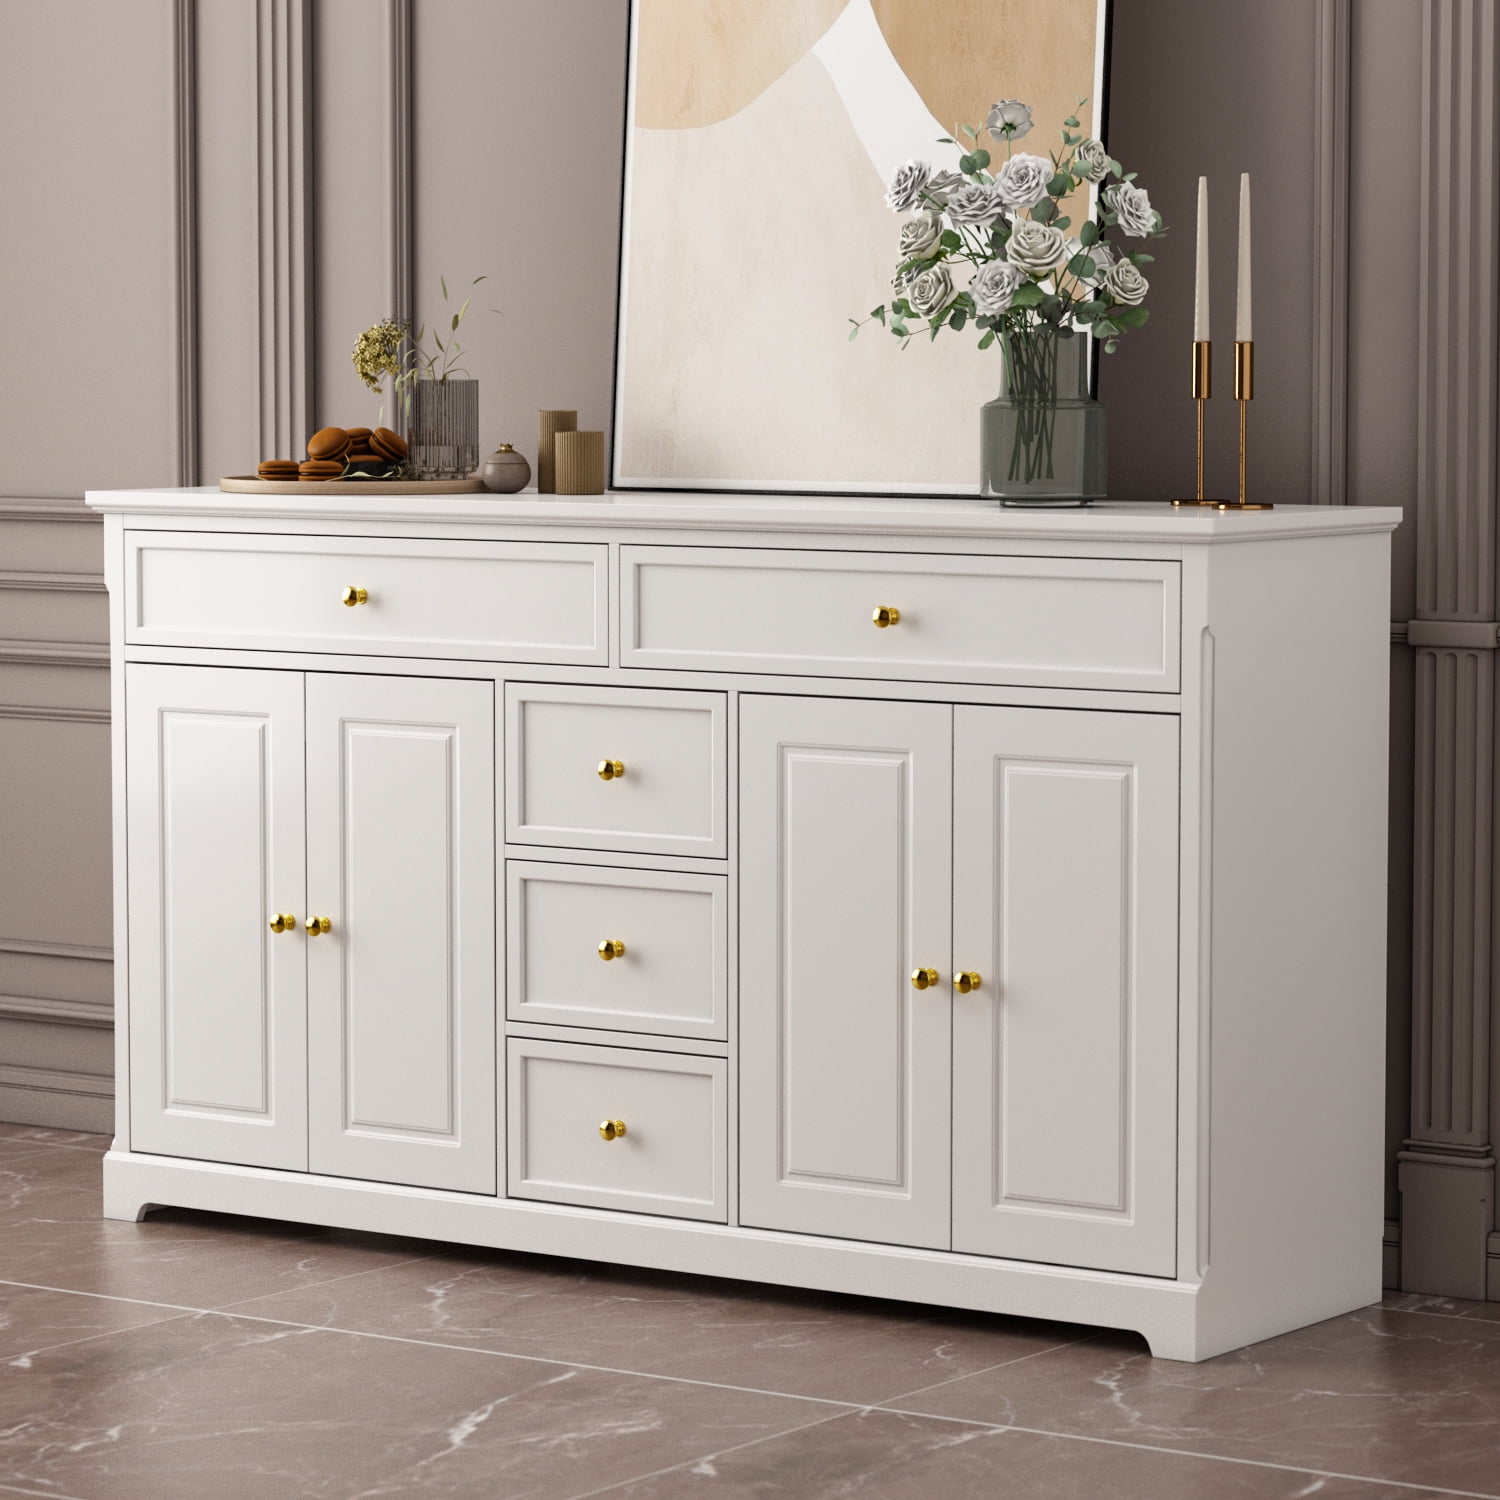 Hitow Sideboards Cabinet with 5 Storage Drawer, 4-Door Buffets ...